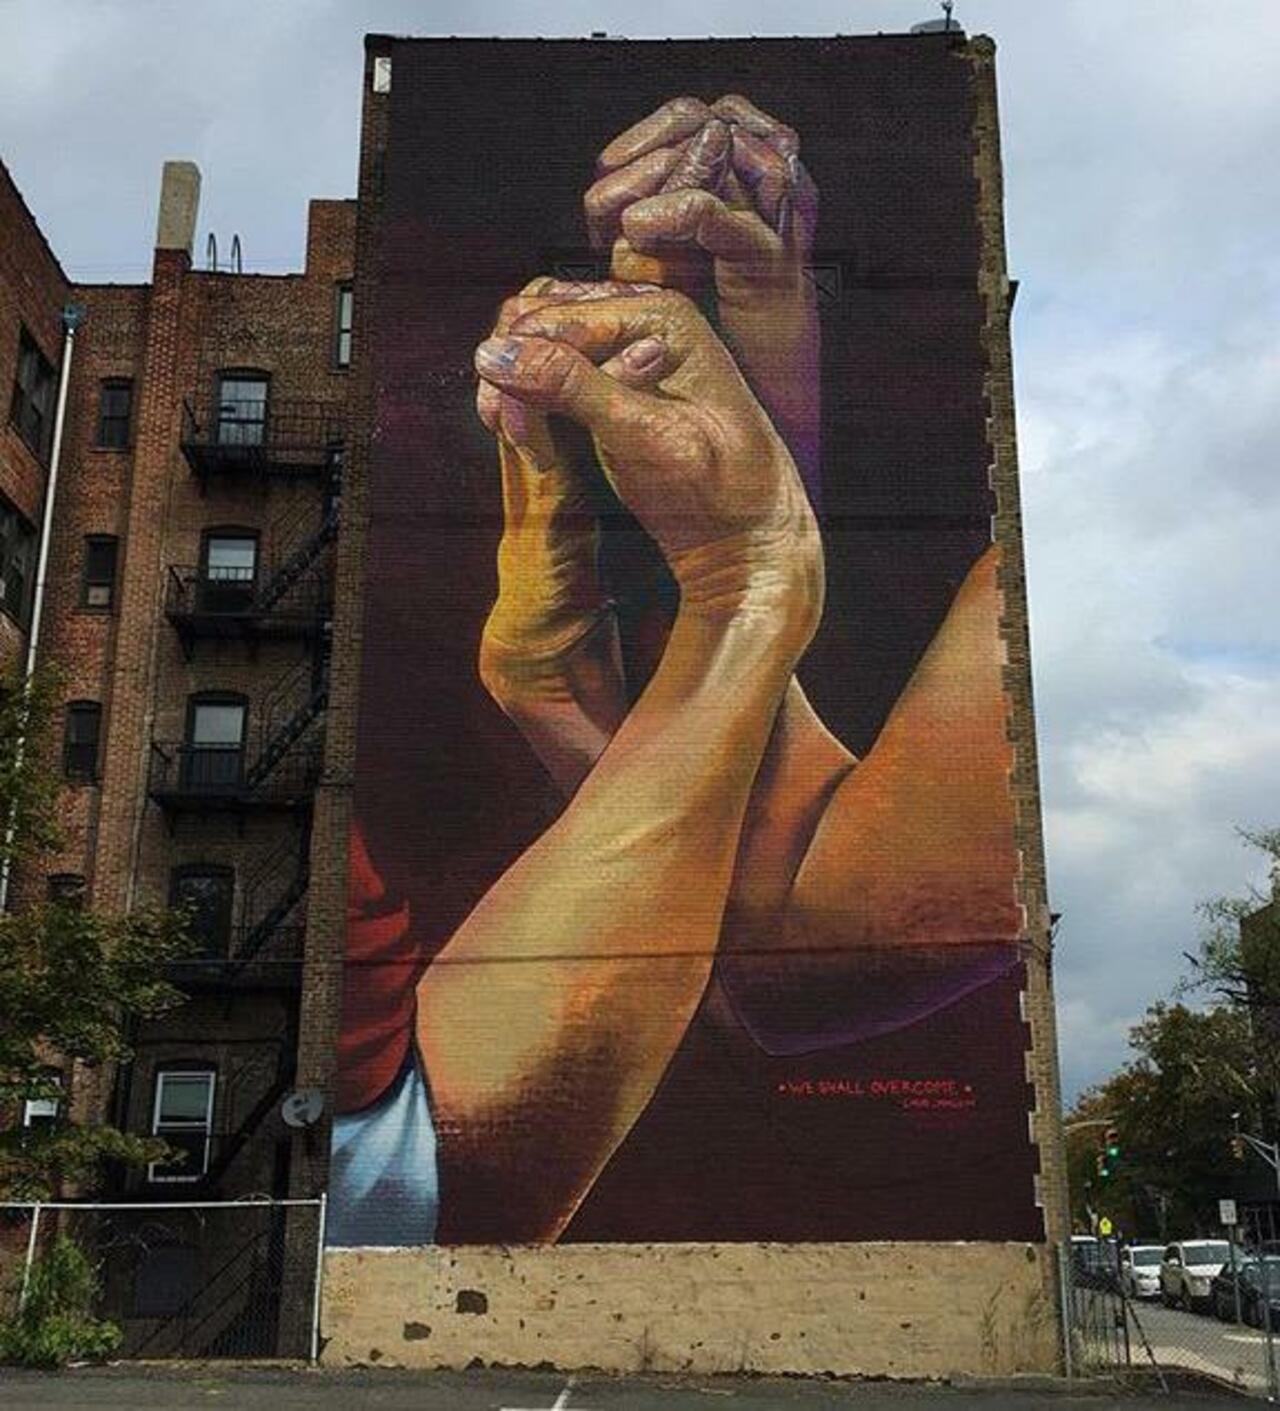 RT belilac "New Street Art by CaseMaclaim in Jersey City for the TheBKcollective 

#art #graffiti #mural #streetart http://t.co/OlbyPOtRAb"